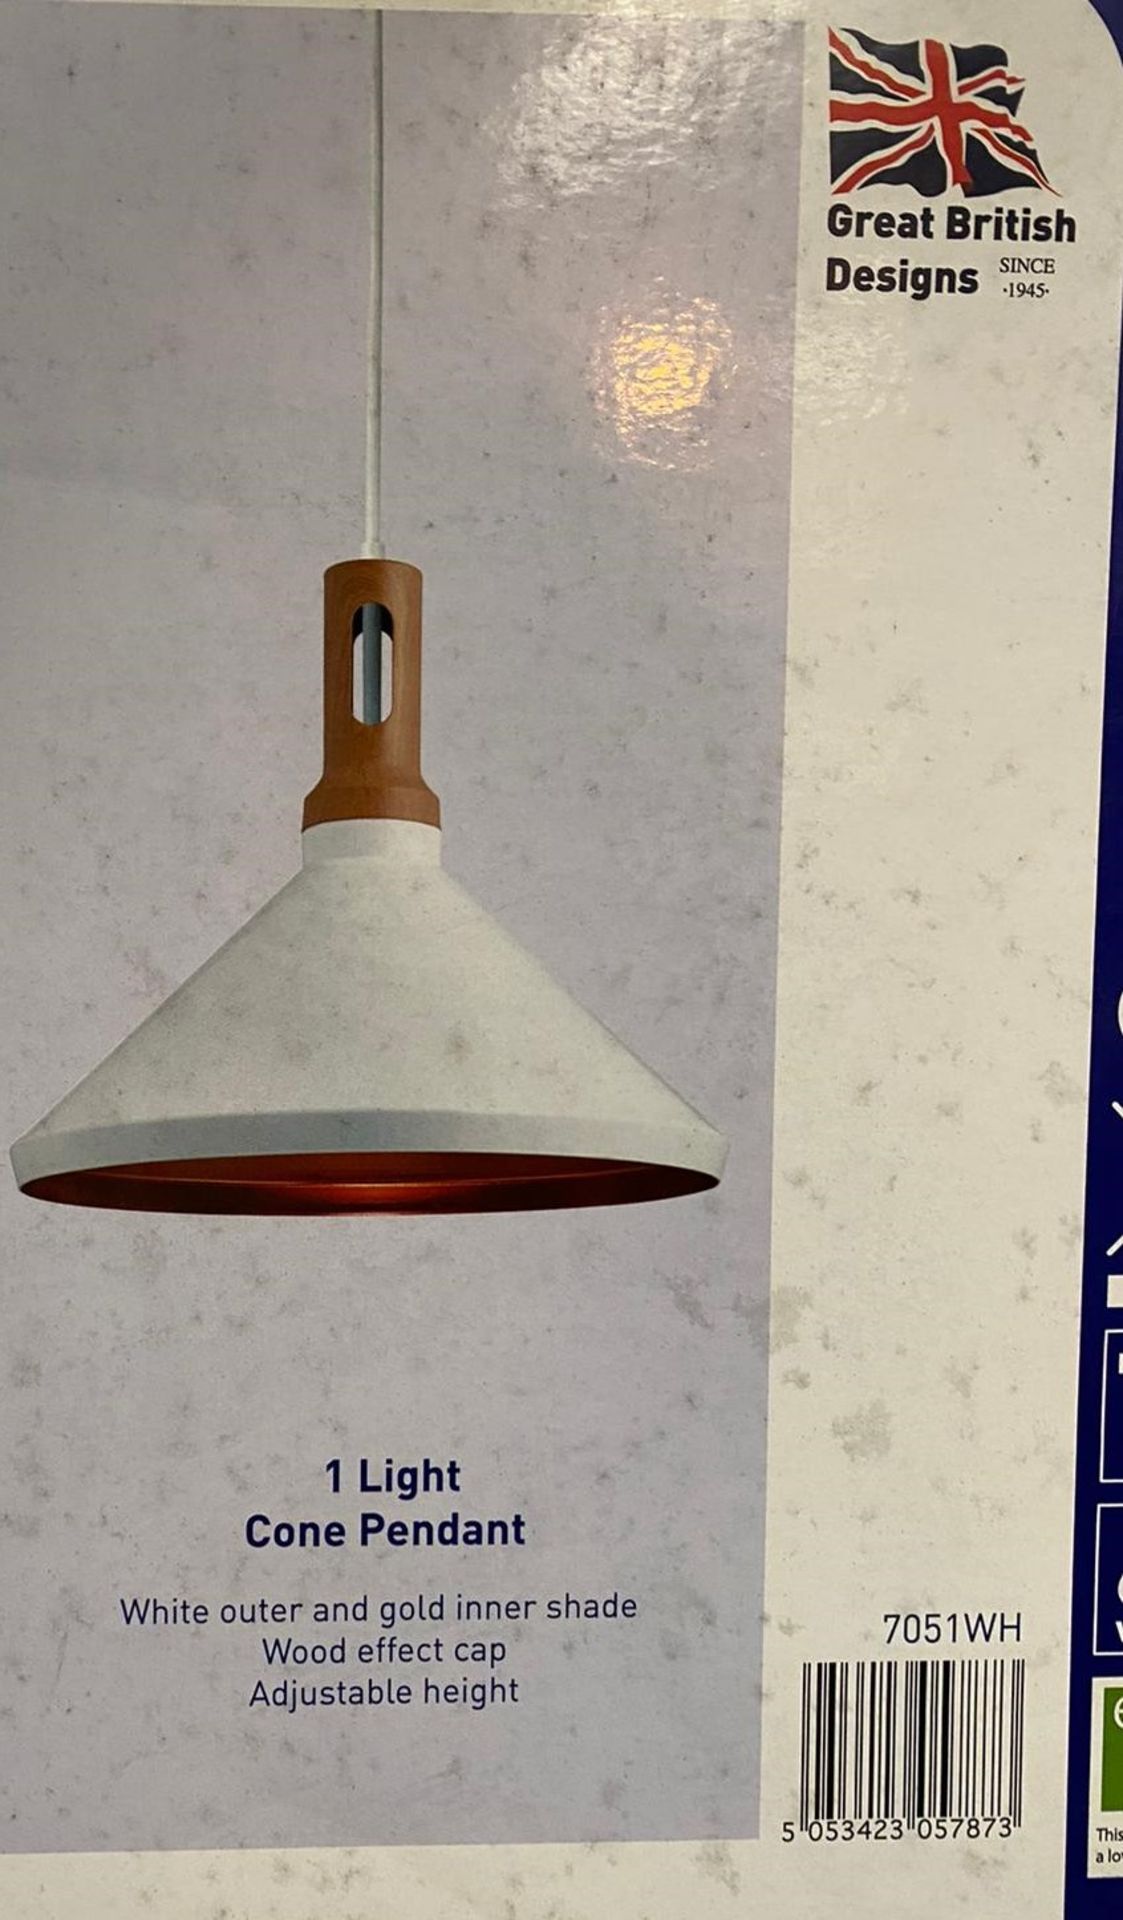 2 x Searchlight 1 Light Cone Pendant in white - Ref: 7051WH - New and Boxed - RRP: £85(each) - Image 2 of 4